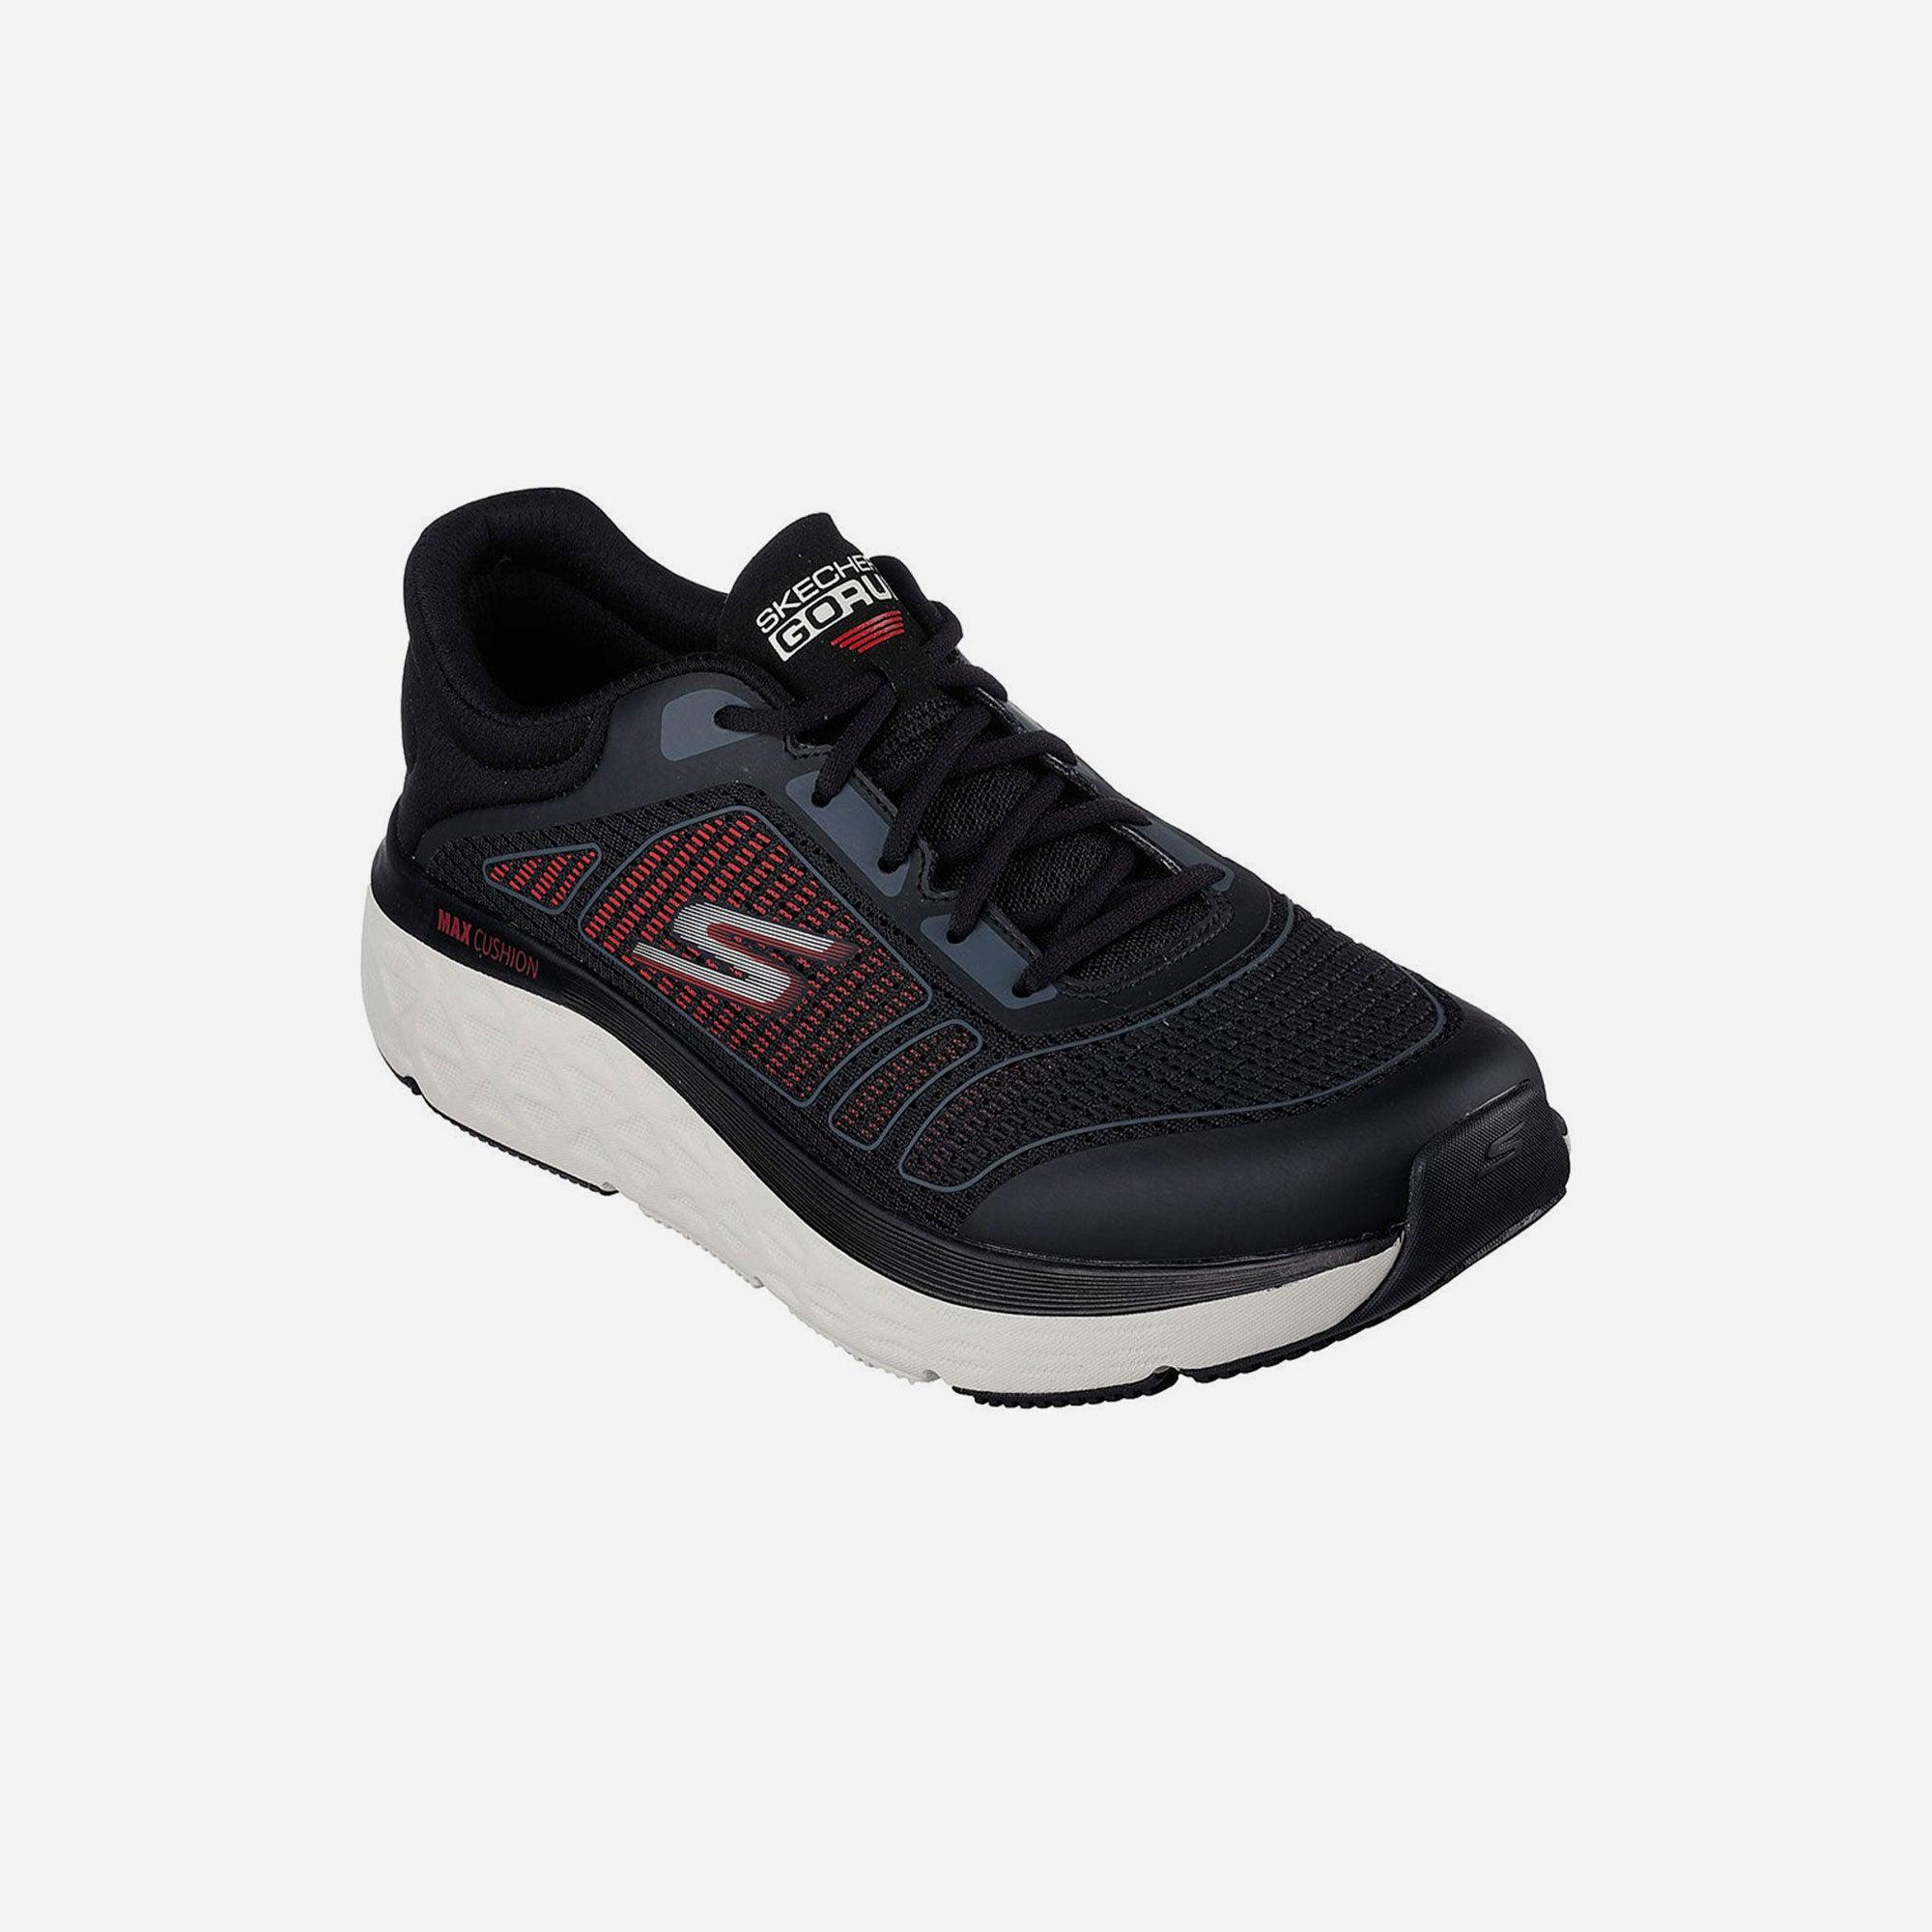 Giày thể thao nam Skechers Max Cushioning Delta - 220357